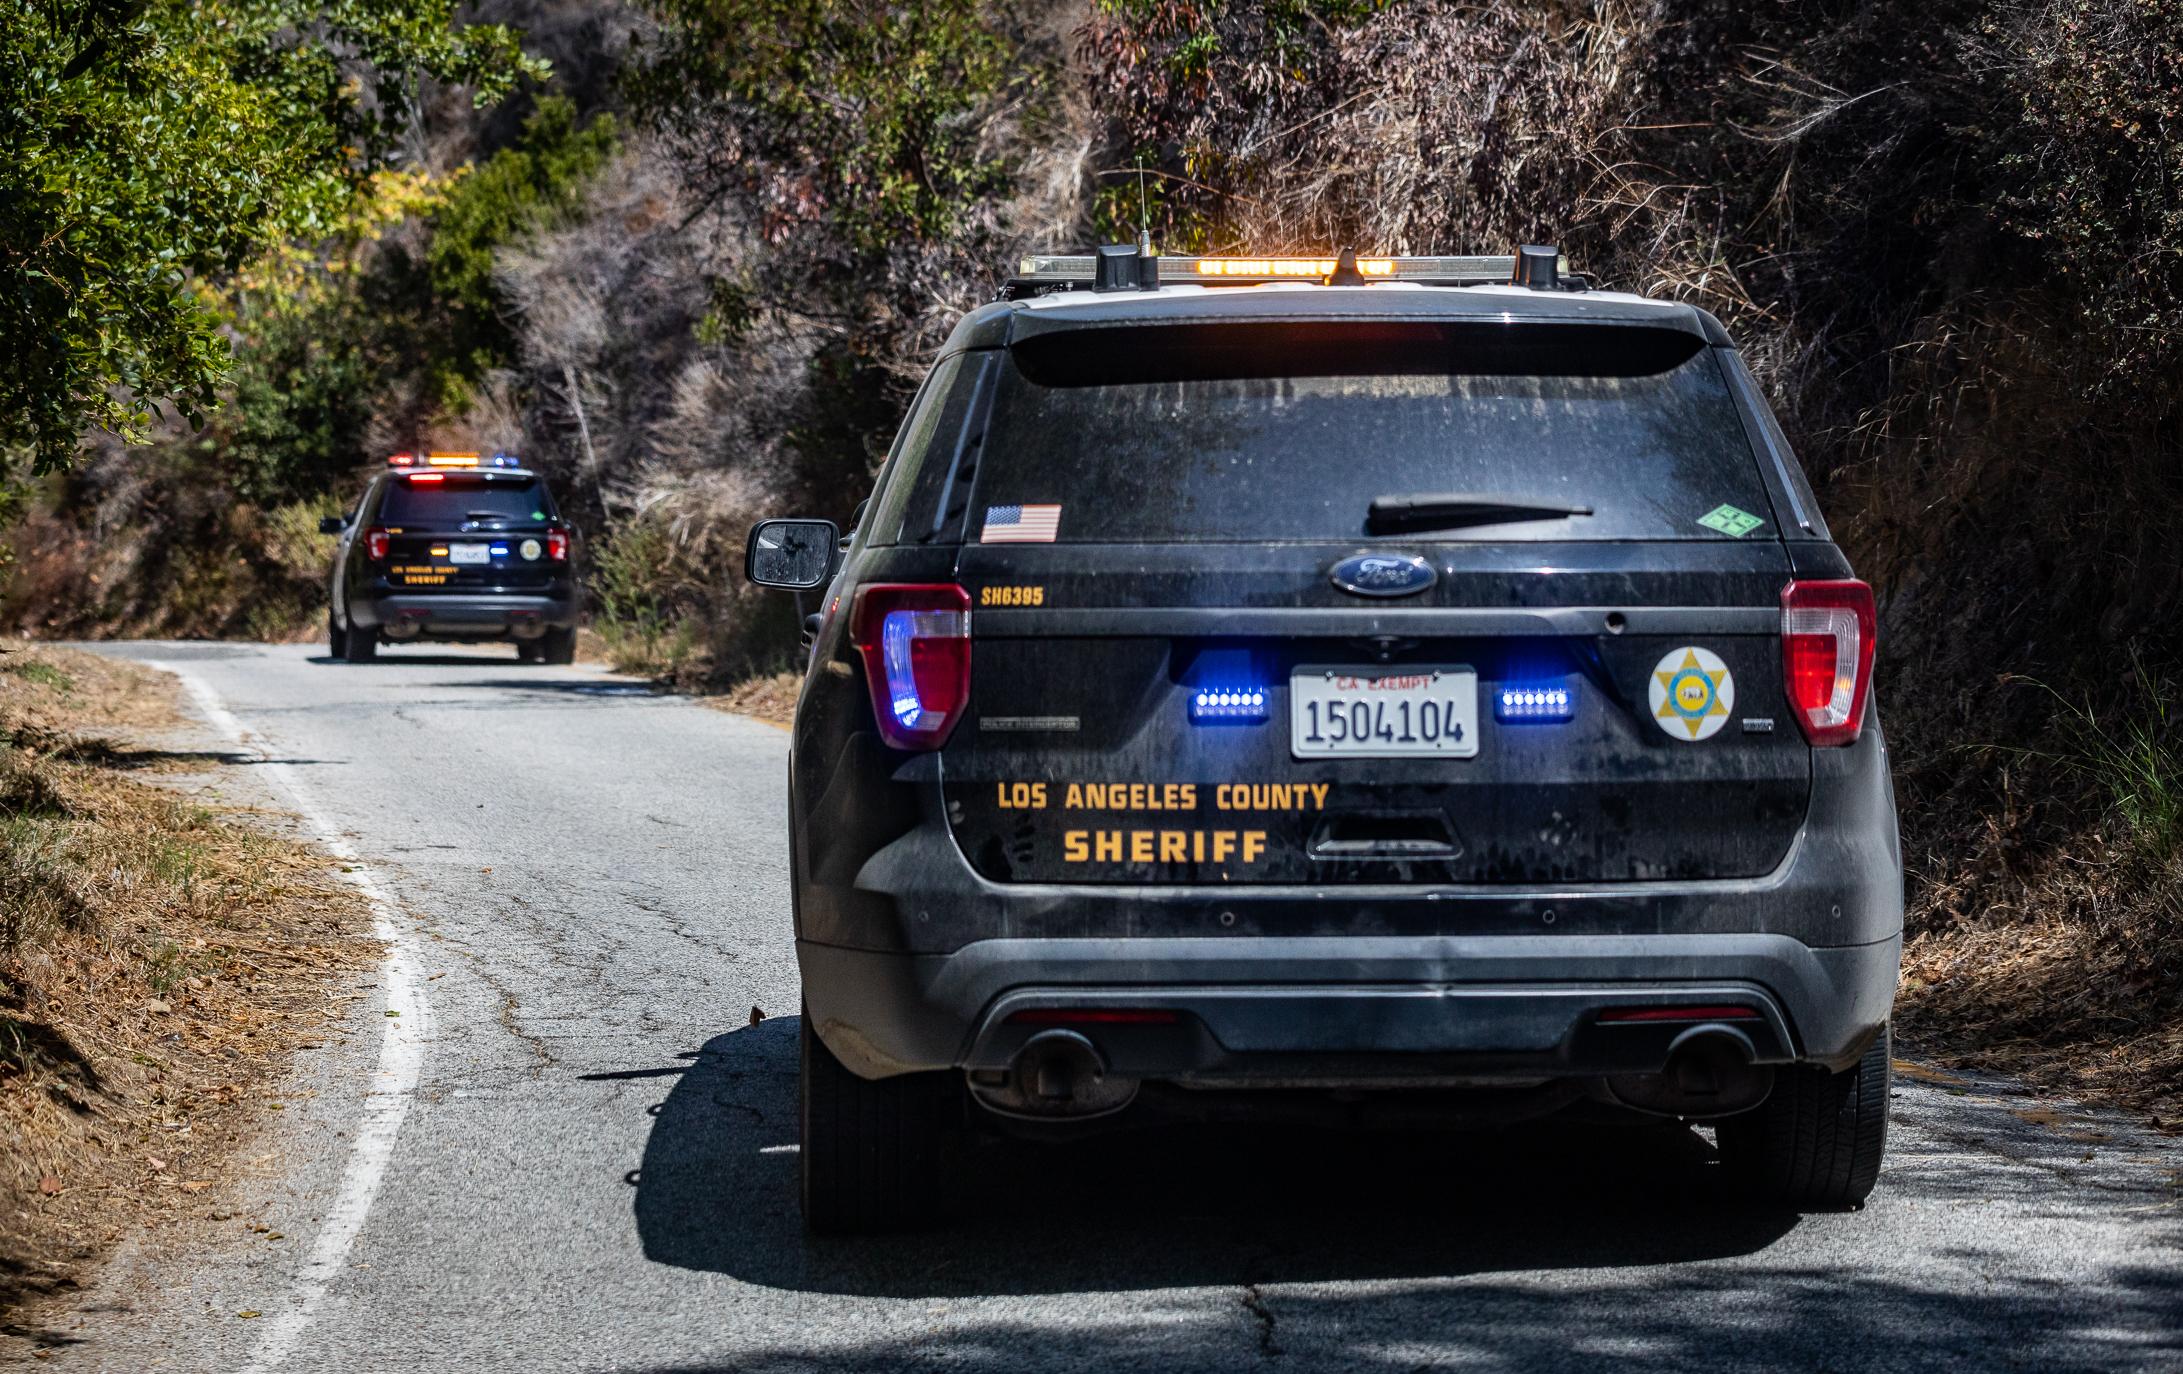 Sheriff’s Deputies Make Arrest After 2 Asians Assaulted in Southern California